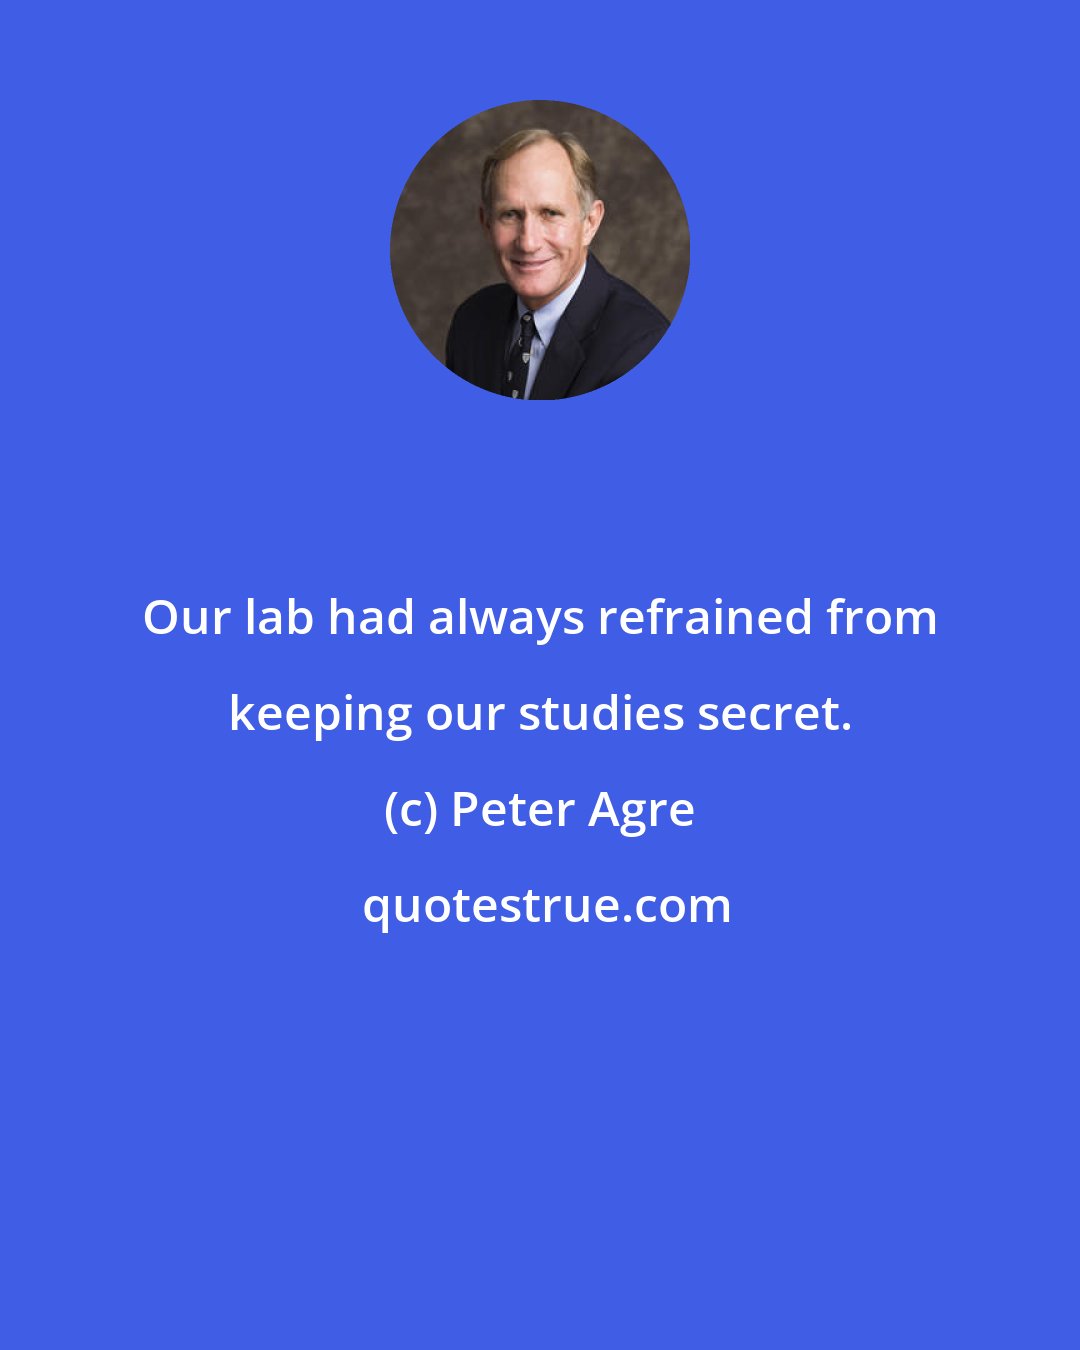 Peter Agre: Our lab had always refrained from keeping our studies secret.